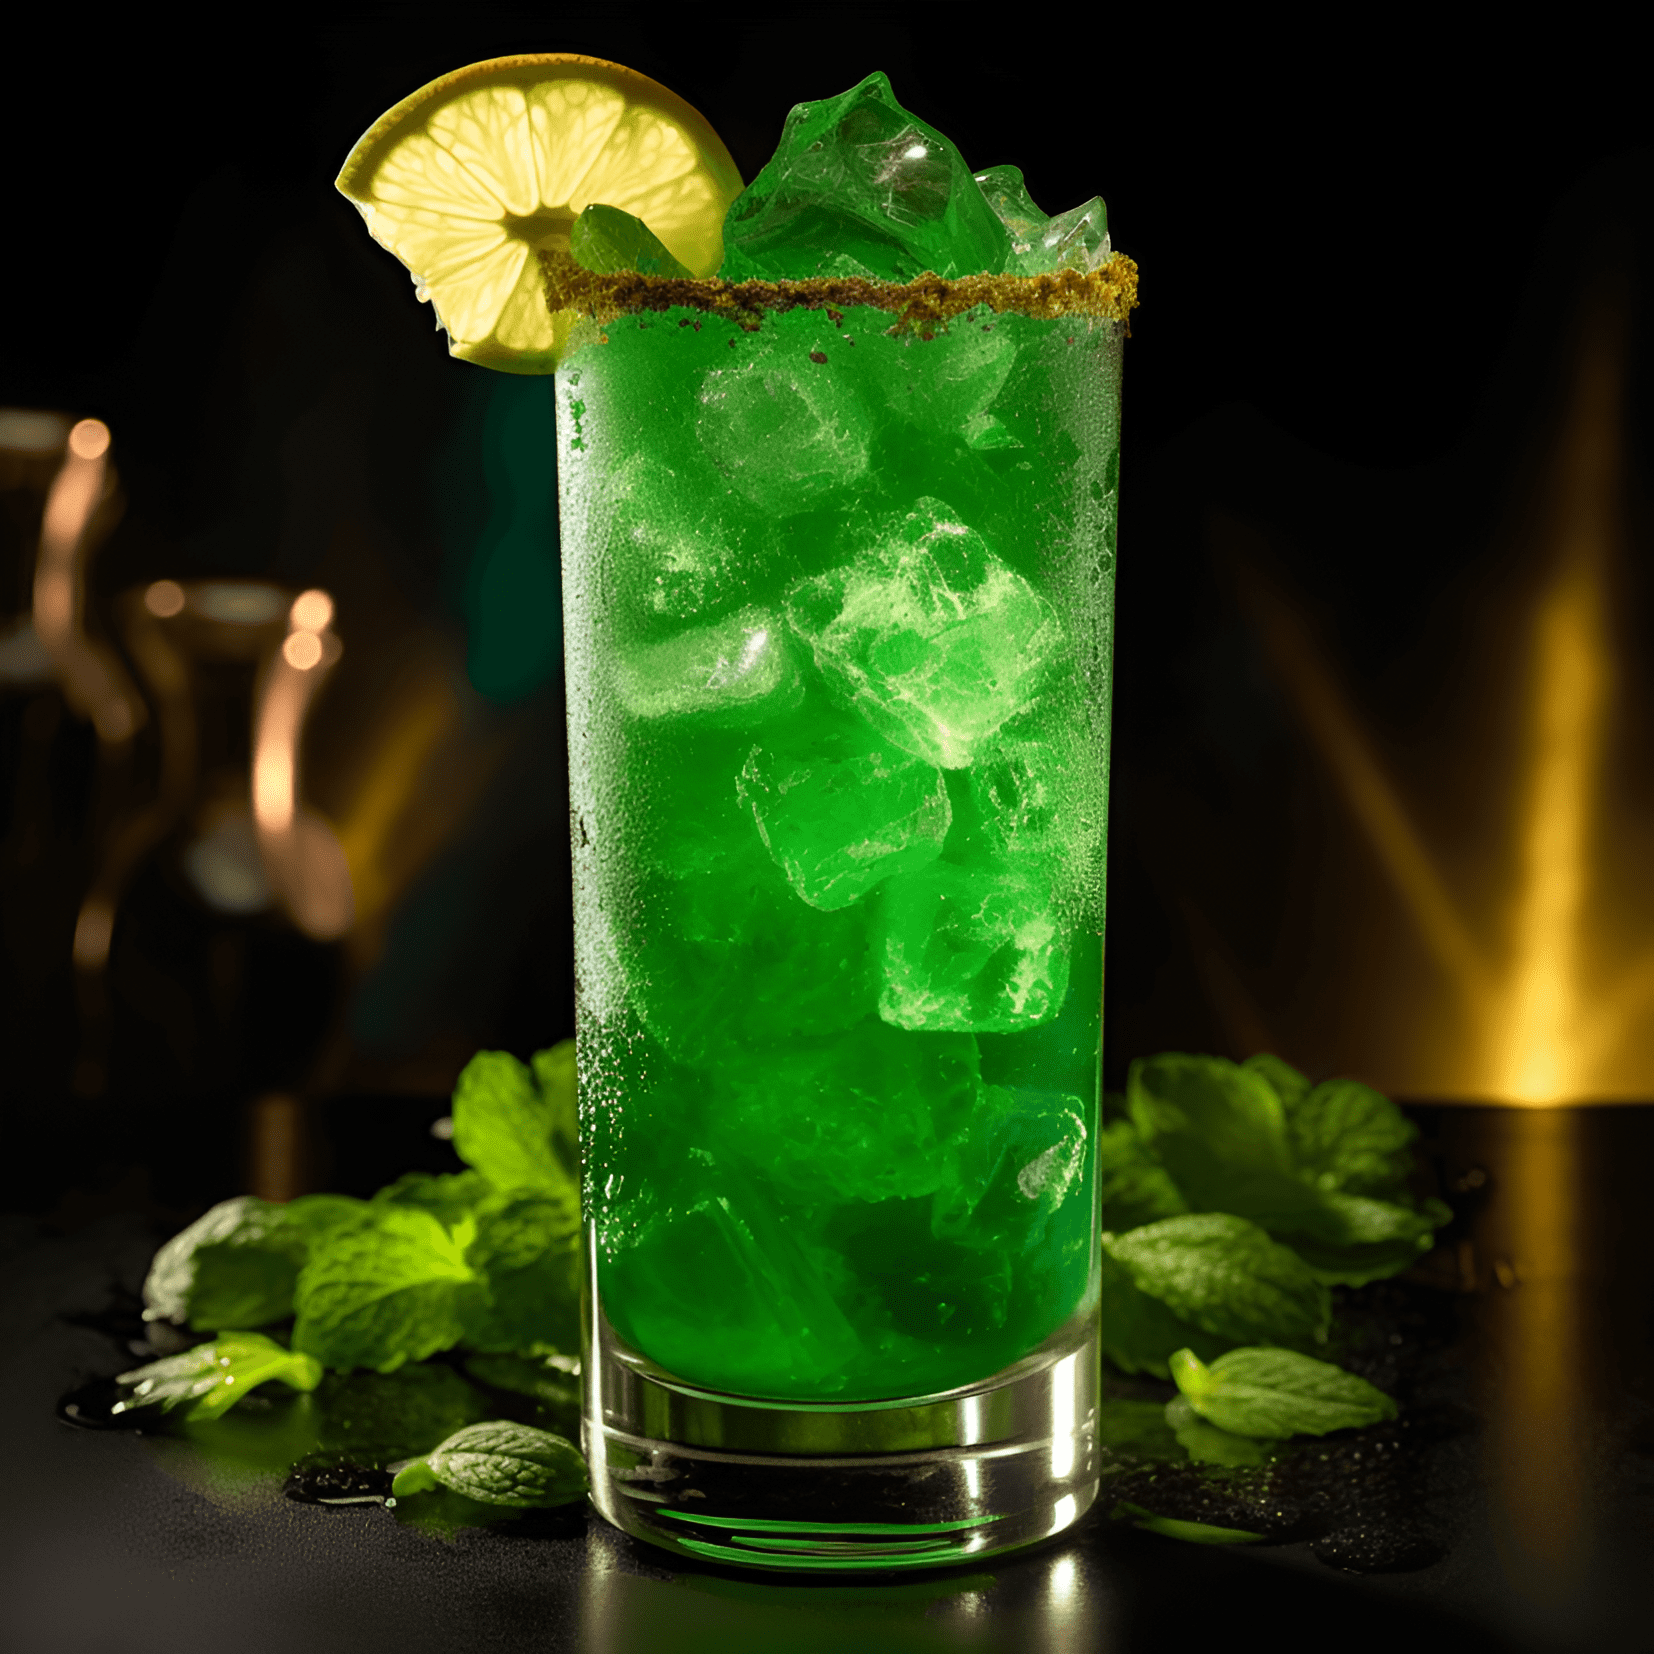 Leprechaun Cocktail Recipe - The Leprechaun cocktail is a refreshing blend of sweet, sour, and slightly fruity flavors. The combination of Irish whiskey, sour apple schnapps, and lemon-lime soda creates a well-balanced and invigorating taste sensation.